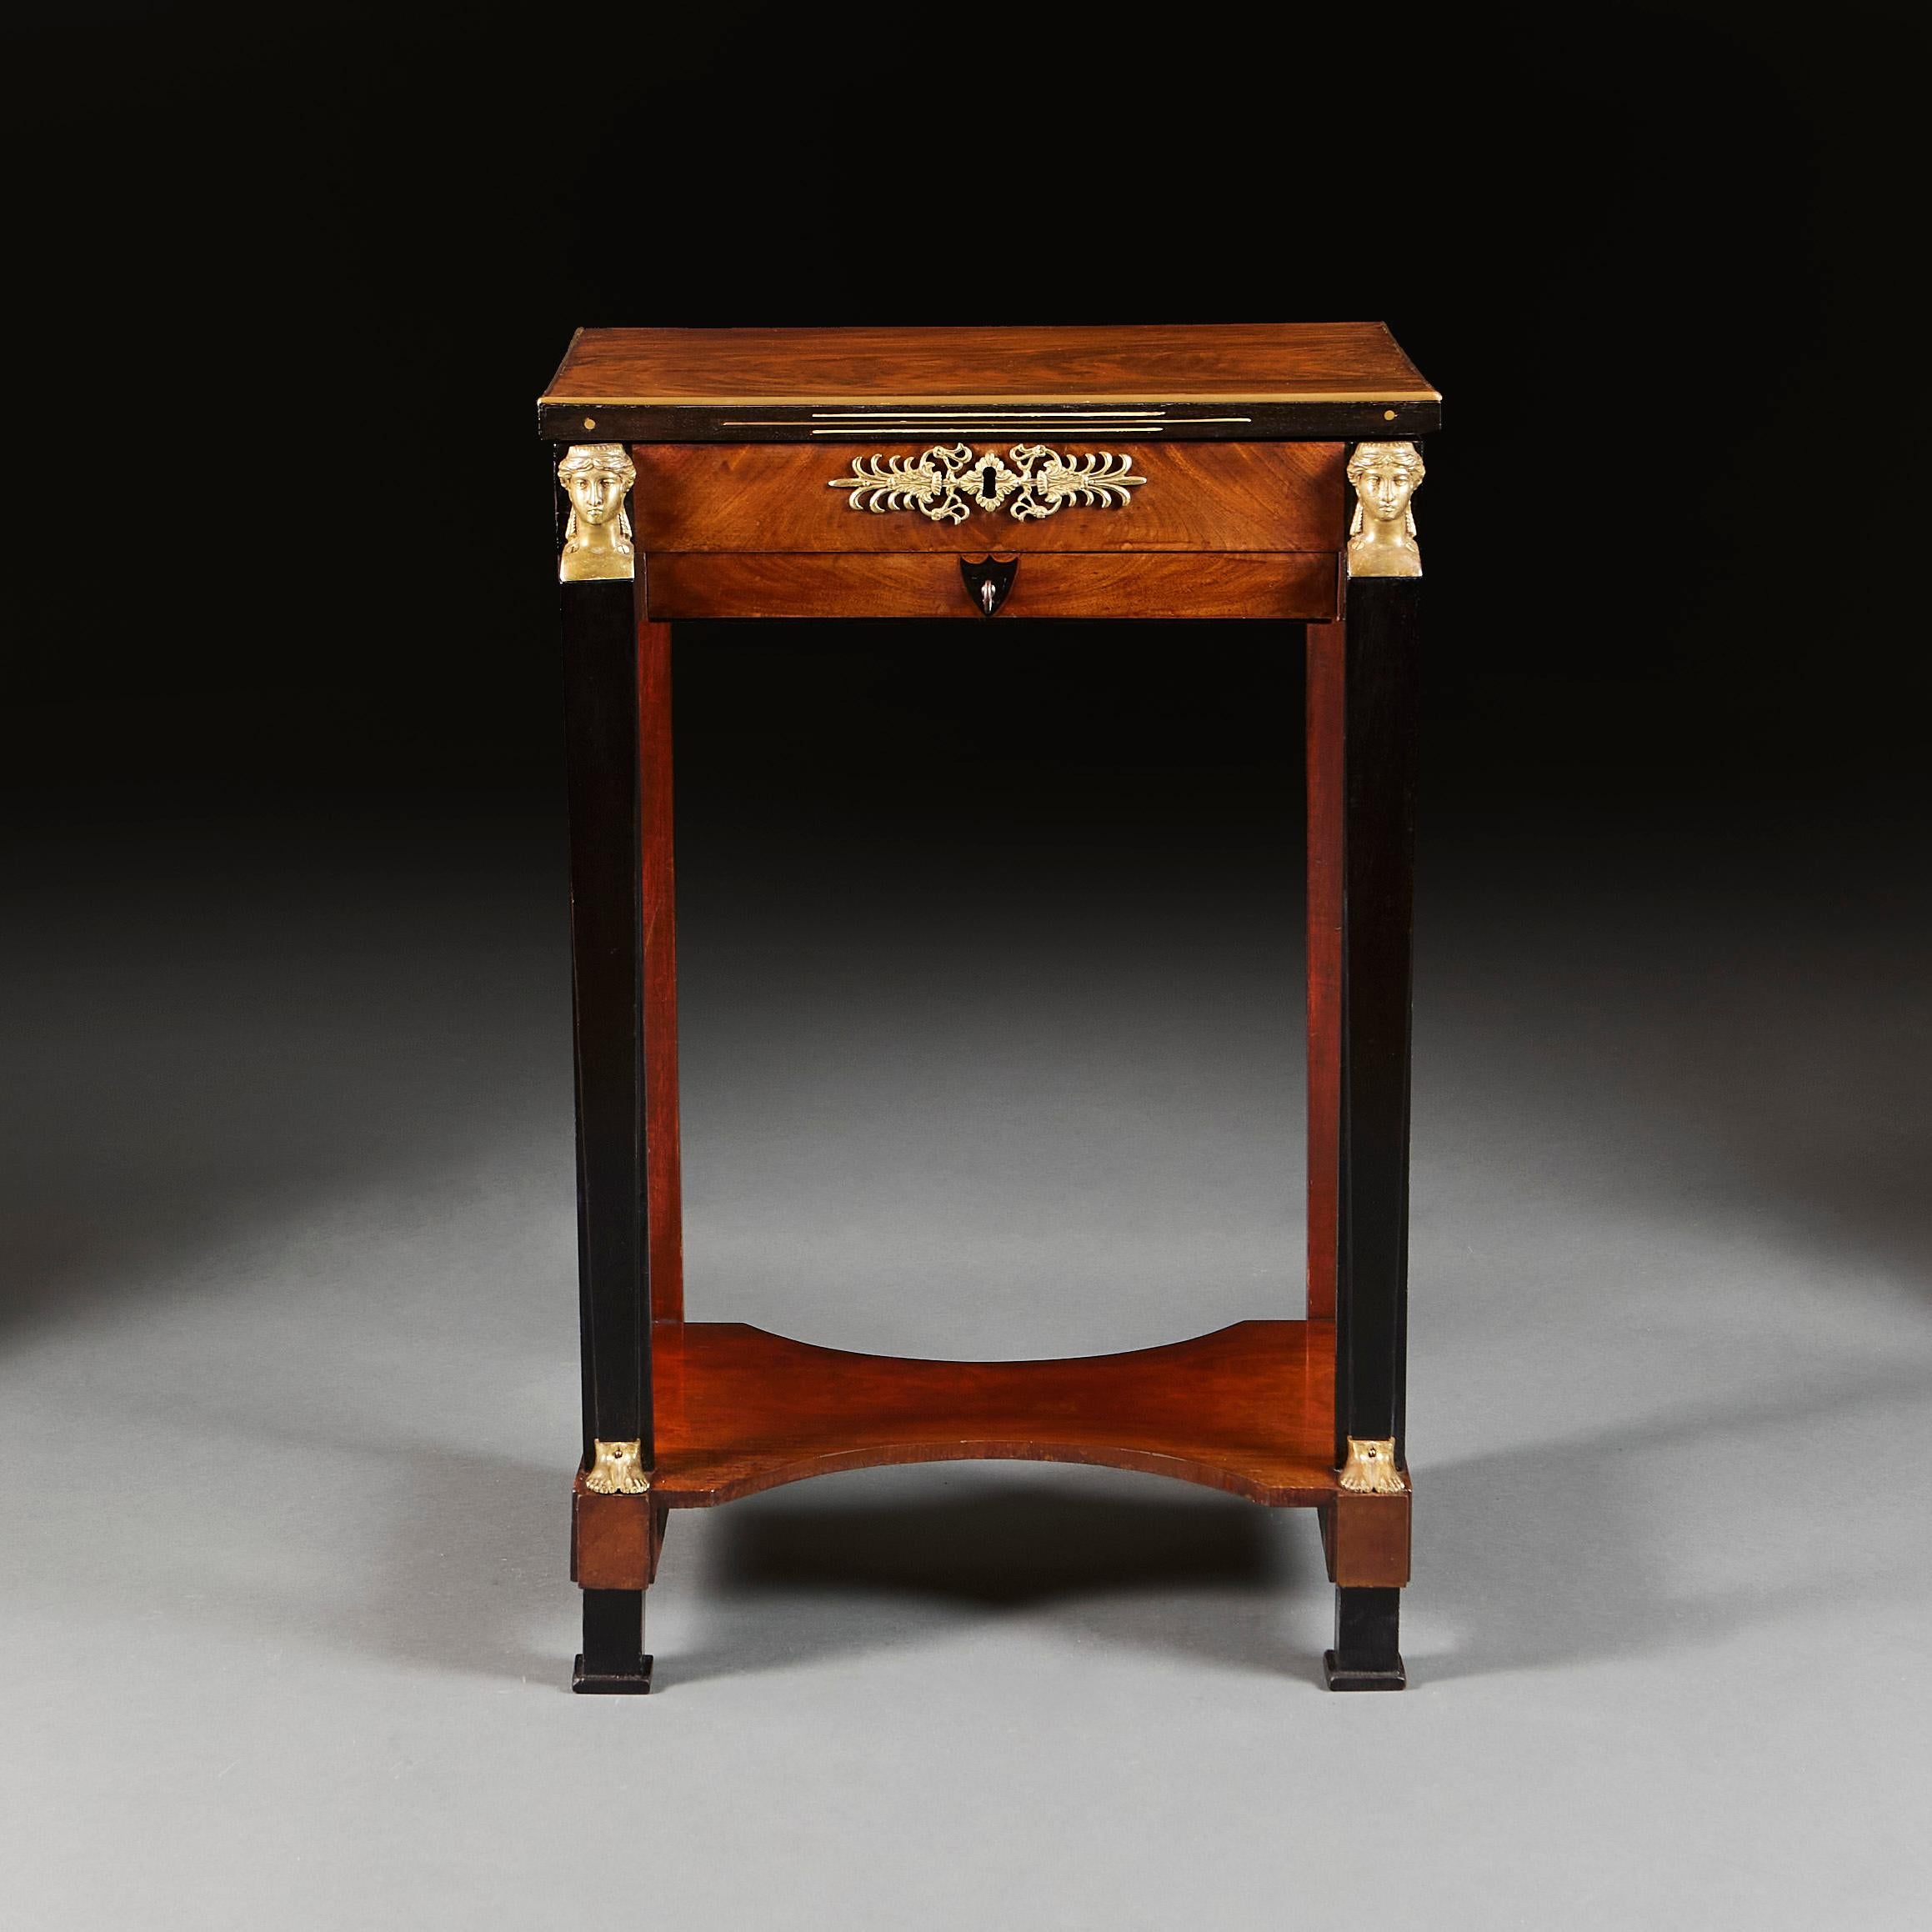 England, circa 1820

A fine early nineteenth century mahogany bedside table with Egyptian caryatids and gilt bronze feet, the top fitted with a mirror and compartments and below a single draw, all supported on tapering feet.

Height 74.00cm
Width